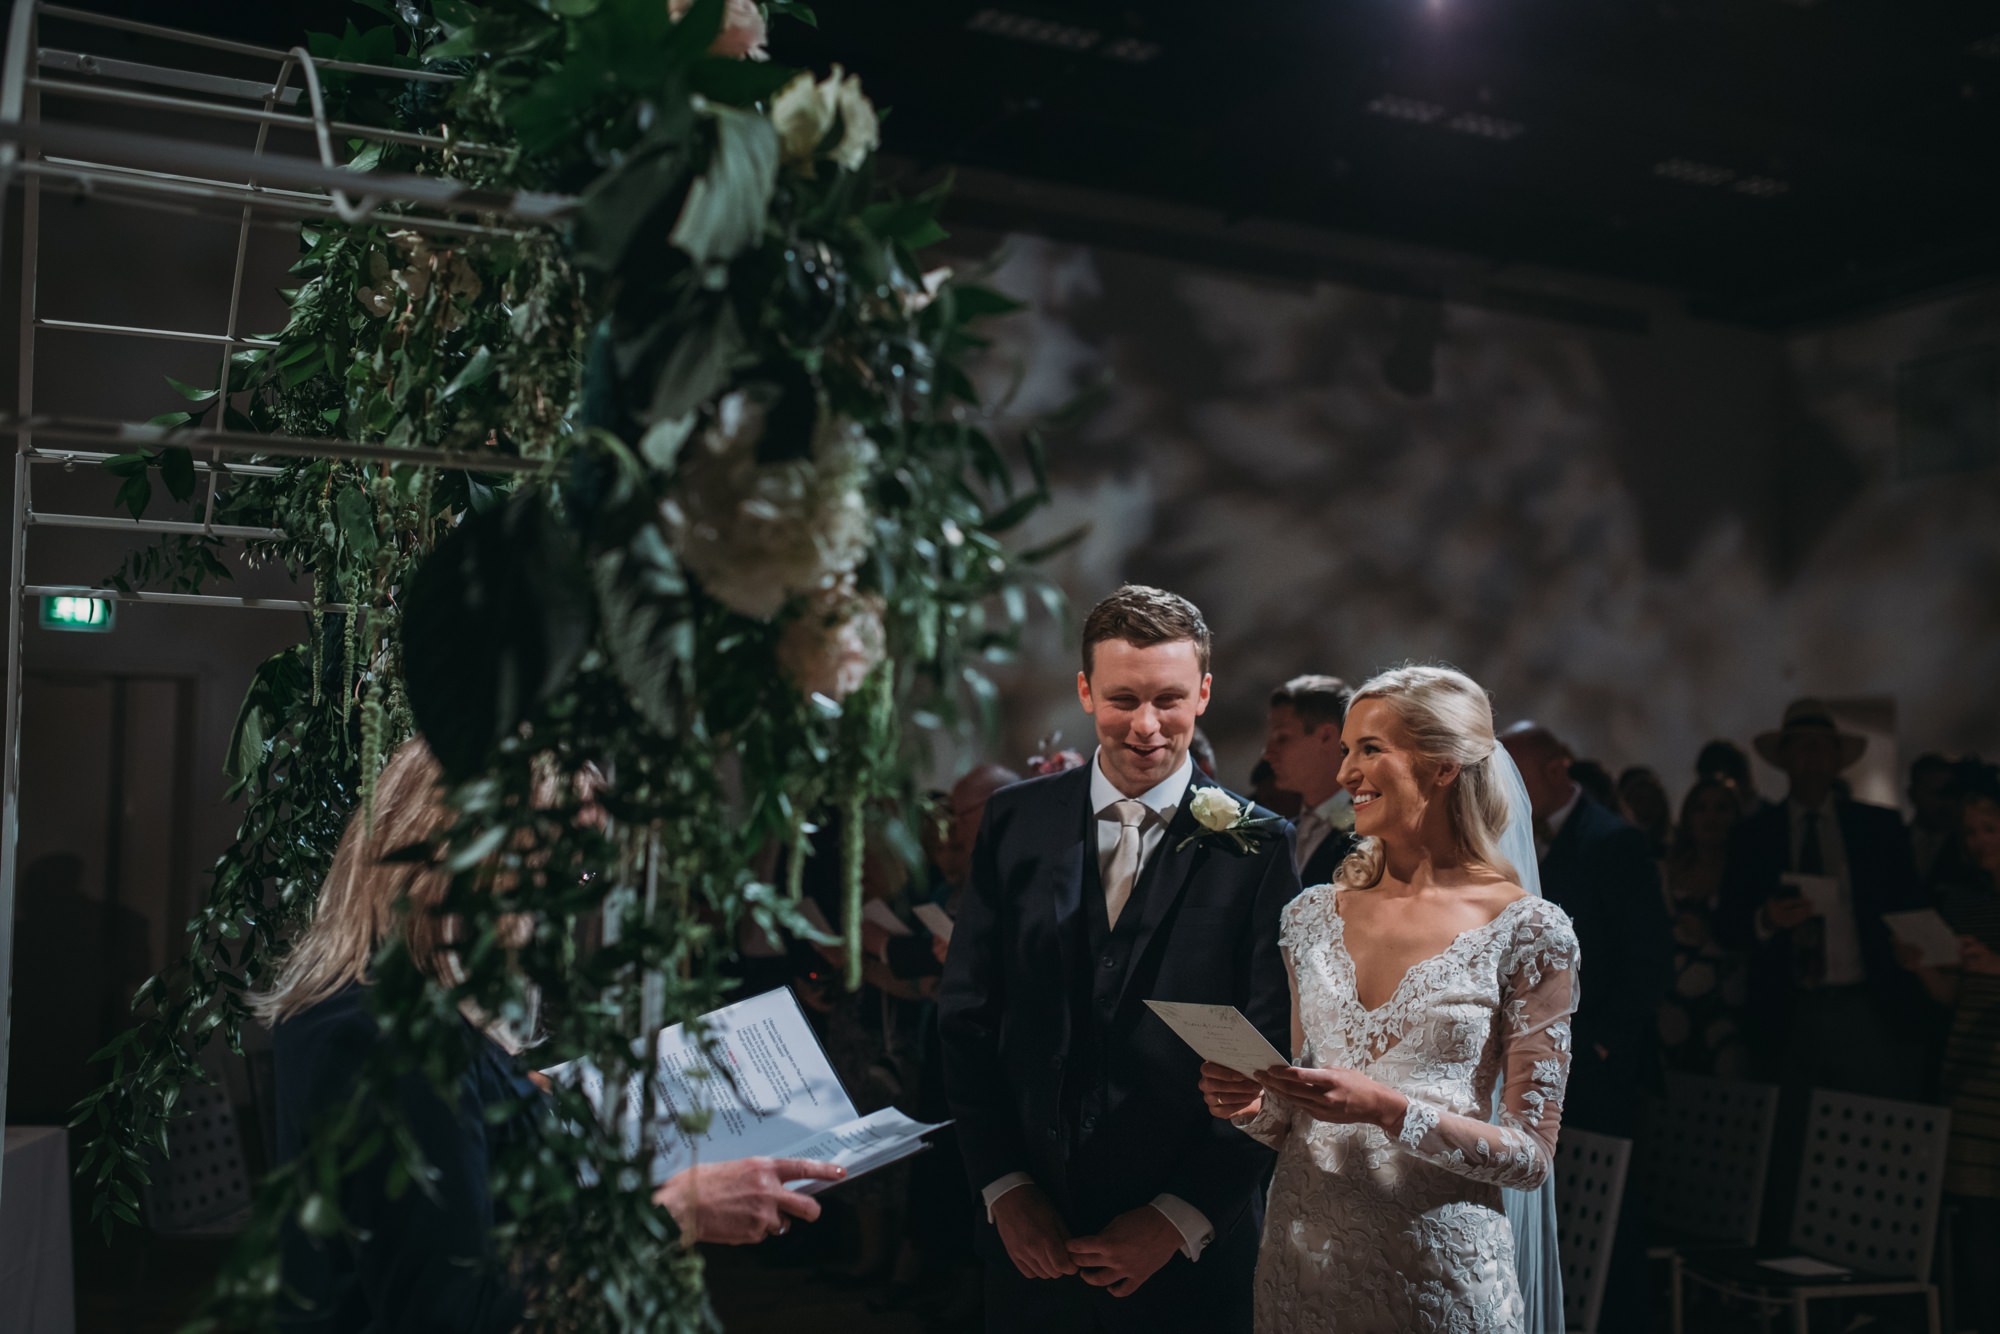 the-baltic-newcastle-wedding-romantic-jo-donaldson-photography-gallery-space-level-1